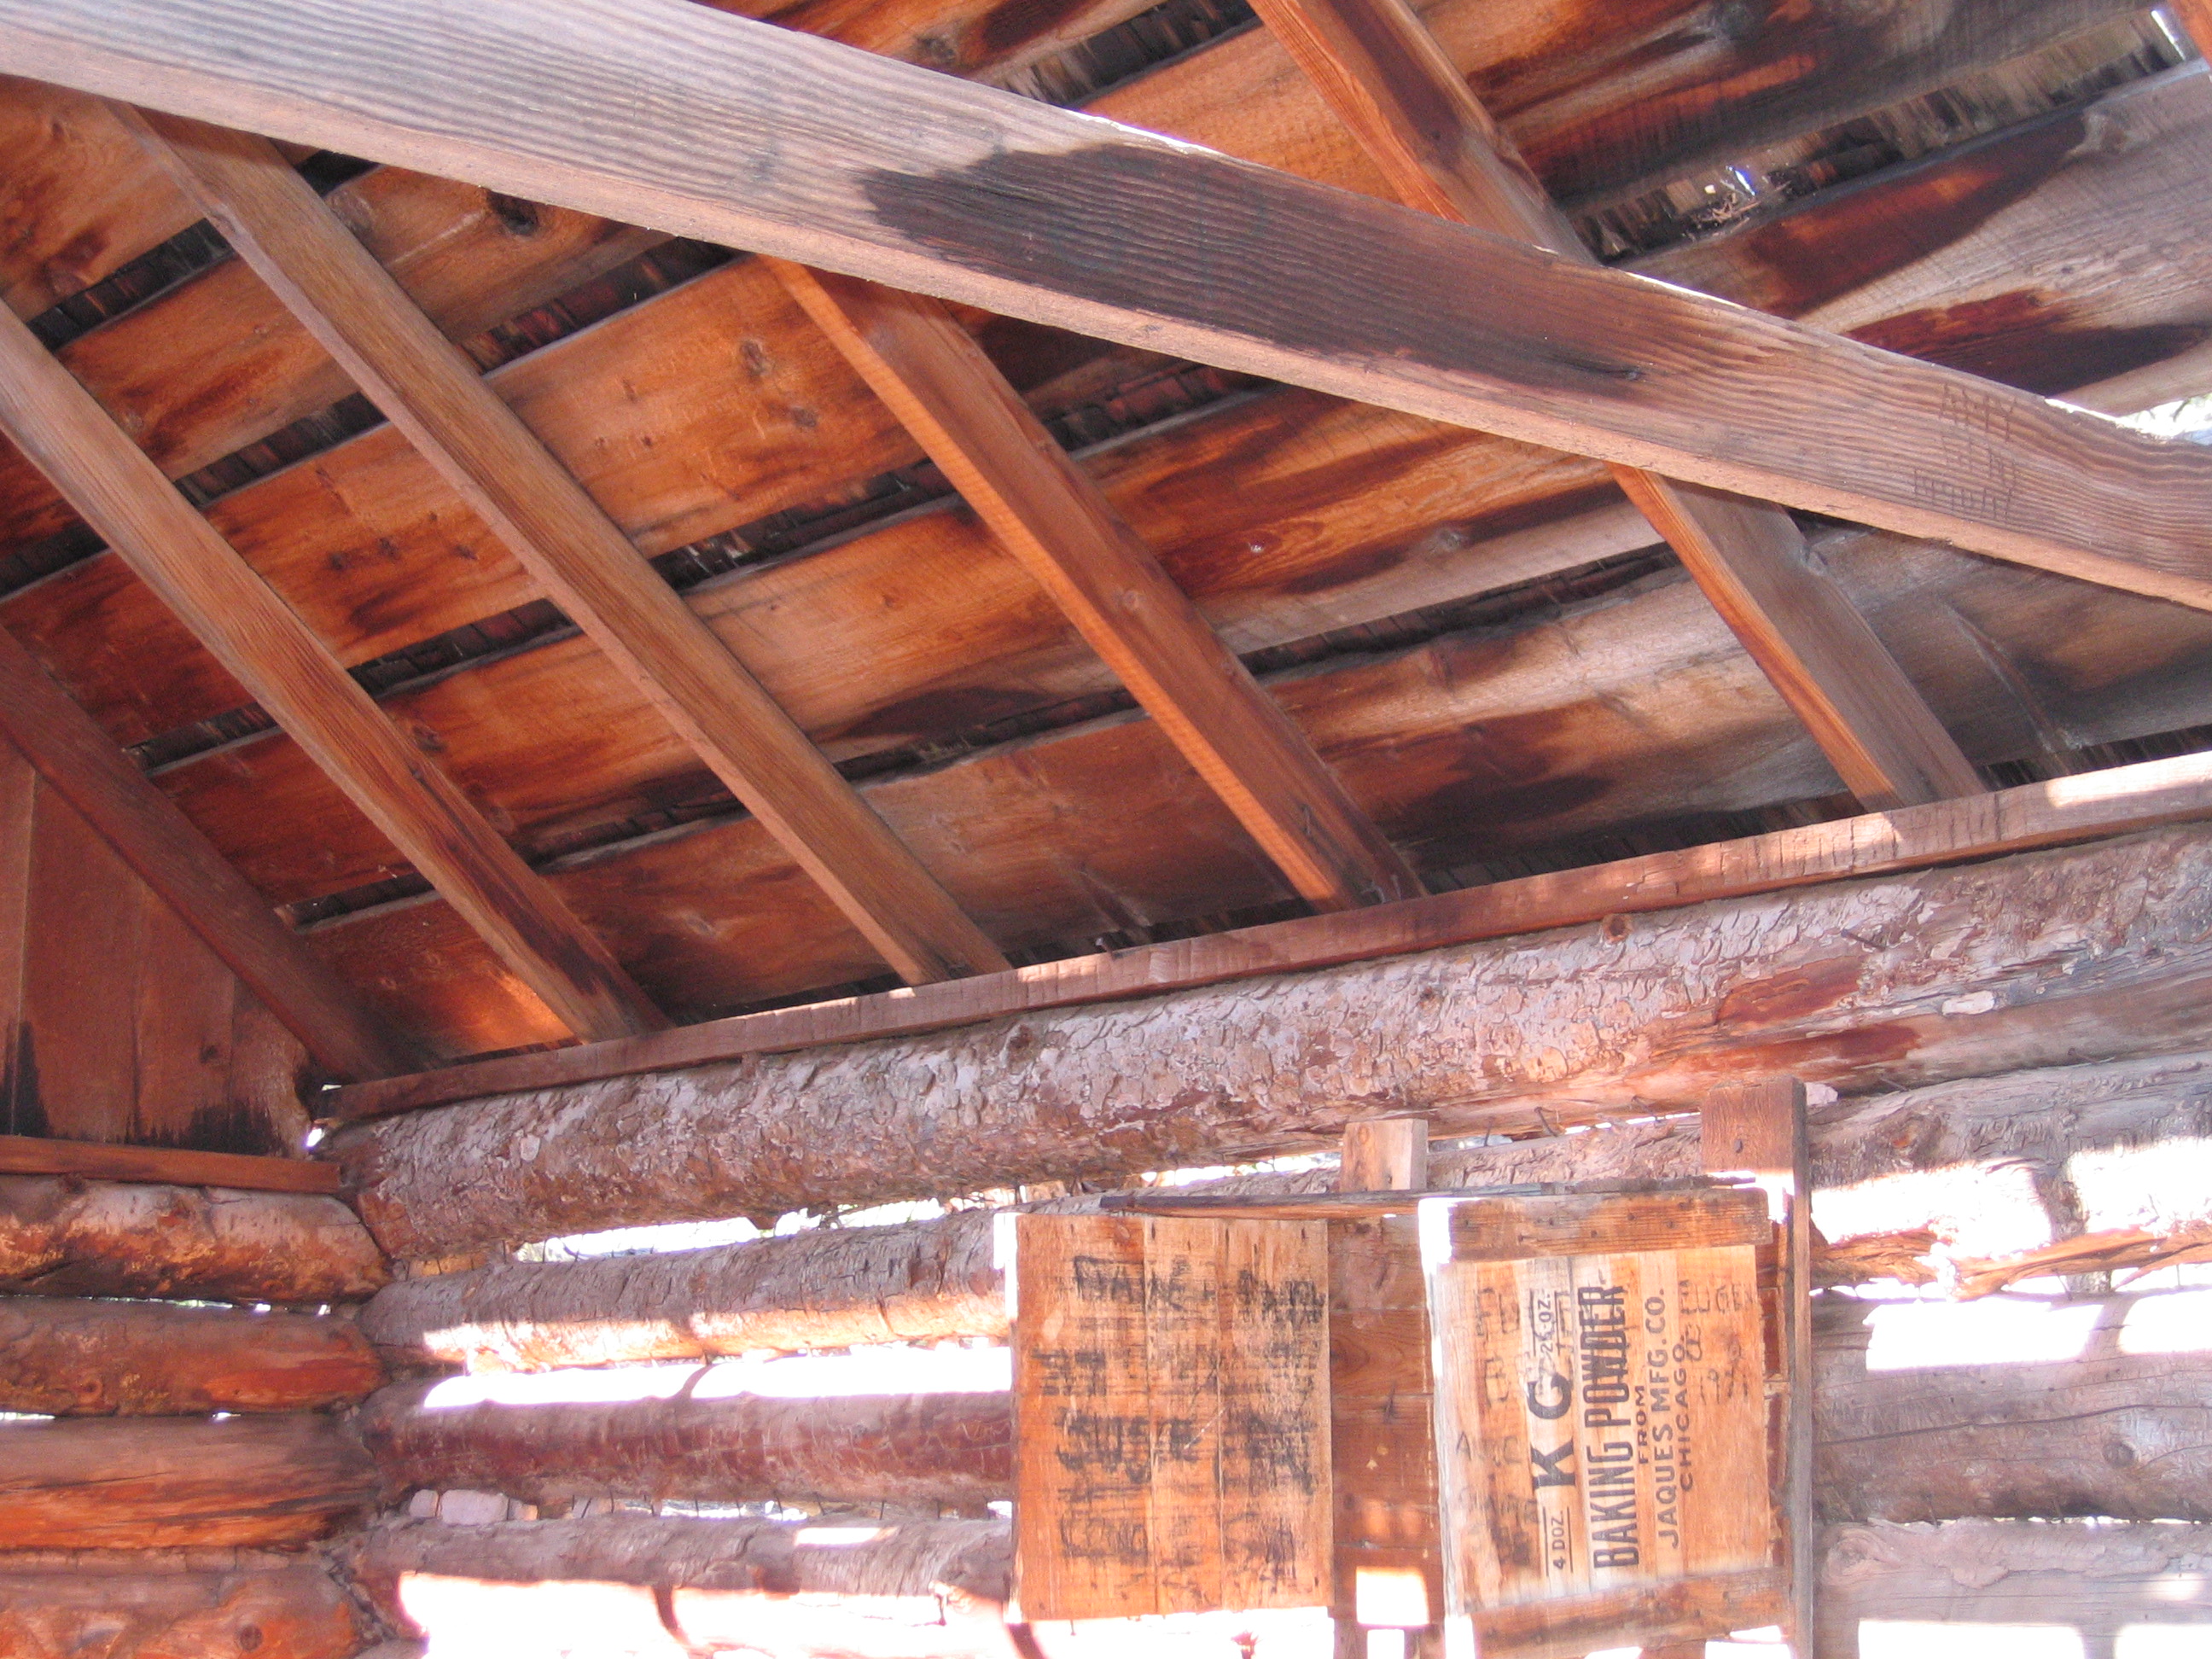 Ceiling rafters and box shelf in the Larson cabin